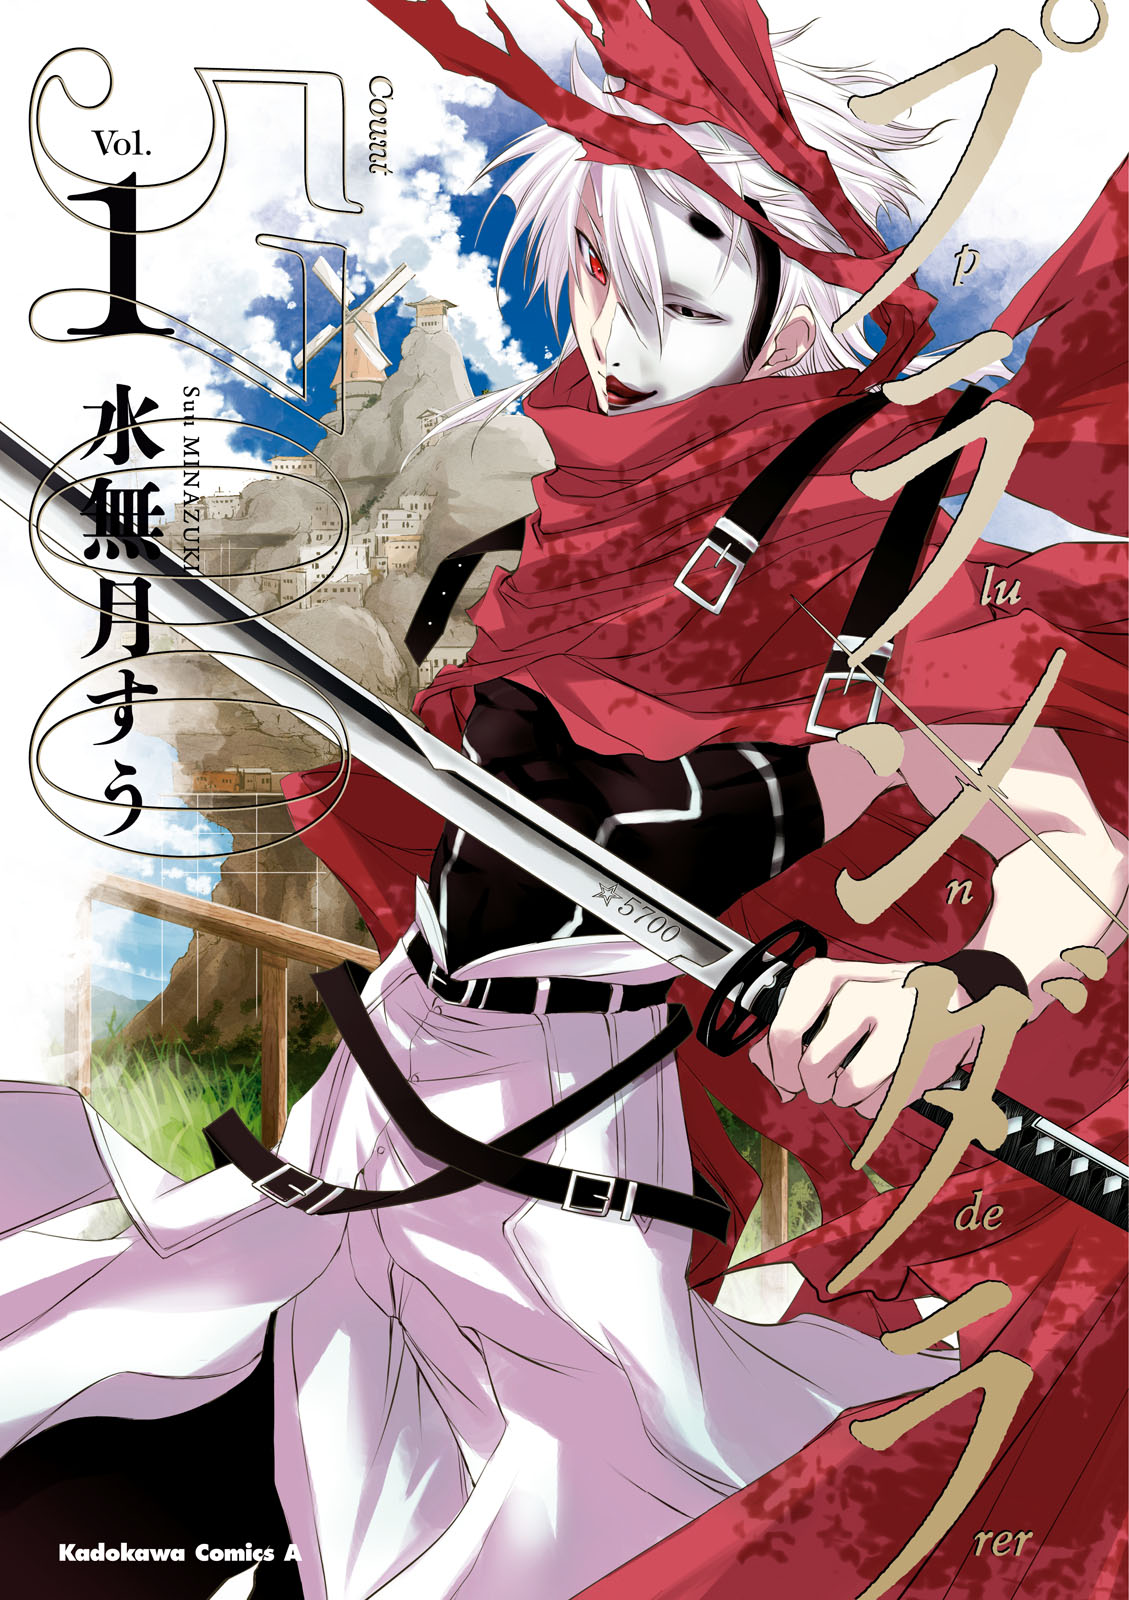 Amazon.com: Plunderer Anime Fabric Wall Scroll Poster (16 x 23) Inches [AN]  Plunderer- 7: Posters & Prints